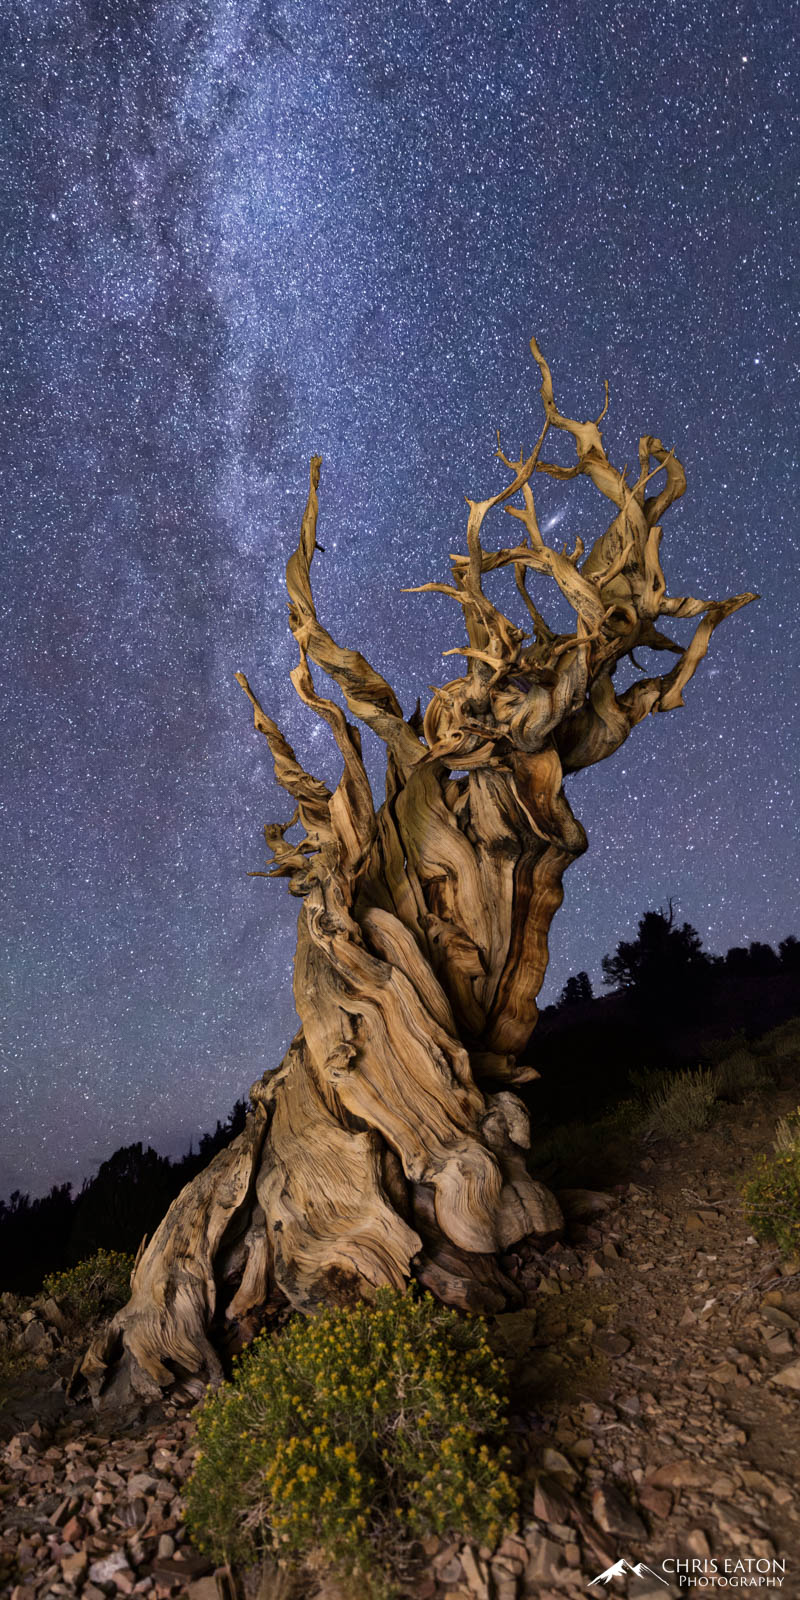 Bristlecone pine tree with the Milky Way and Andromeda galaxy.